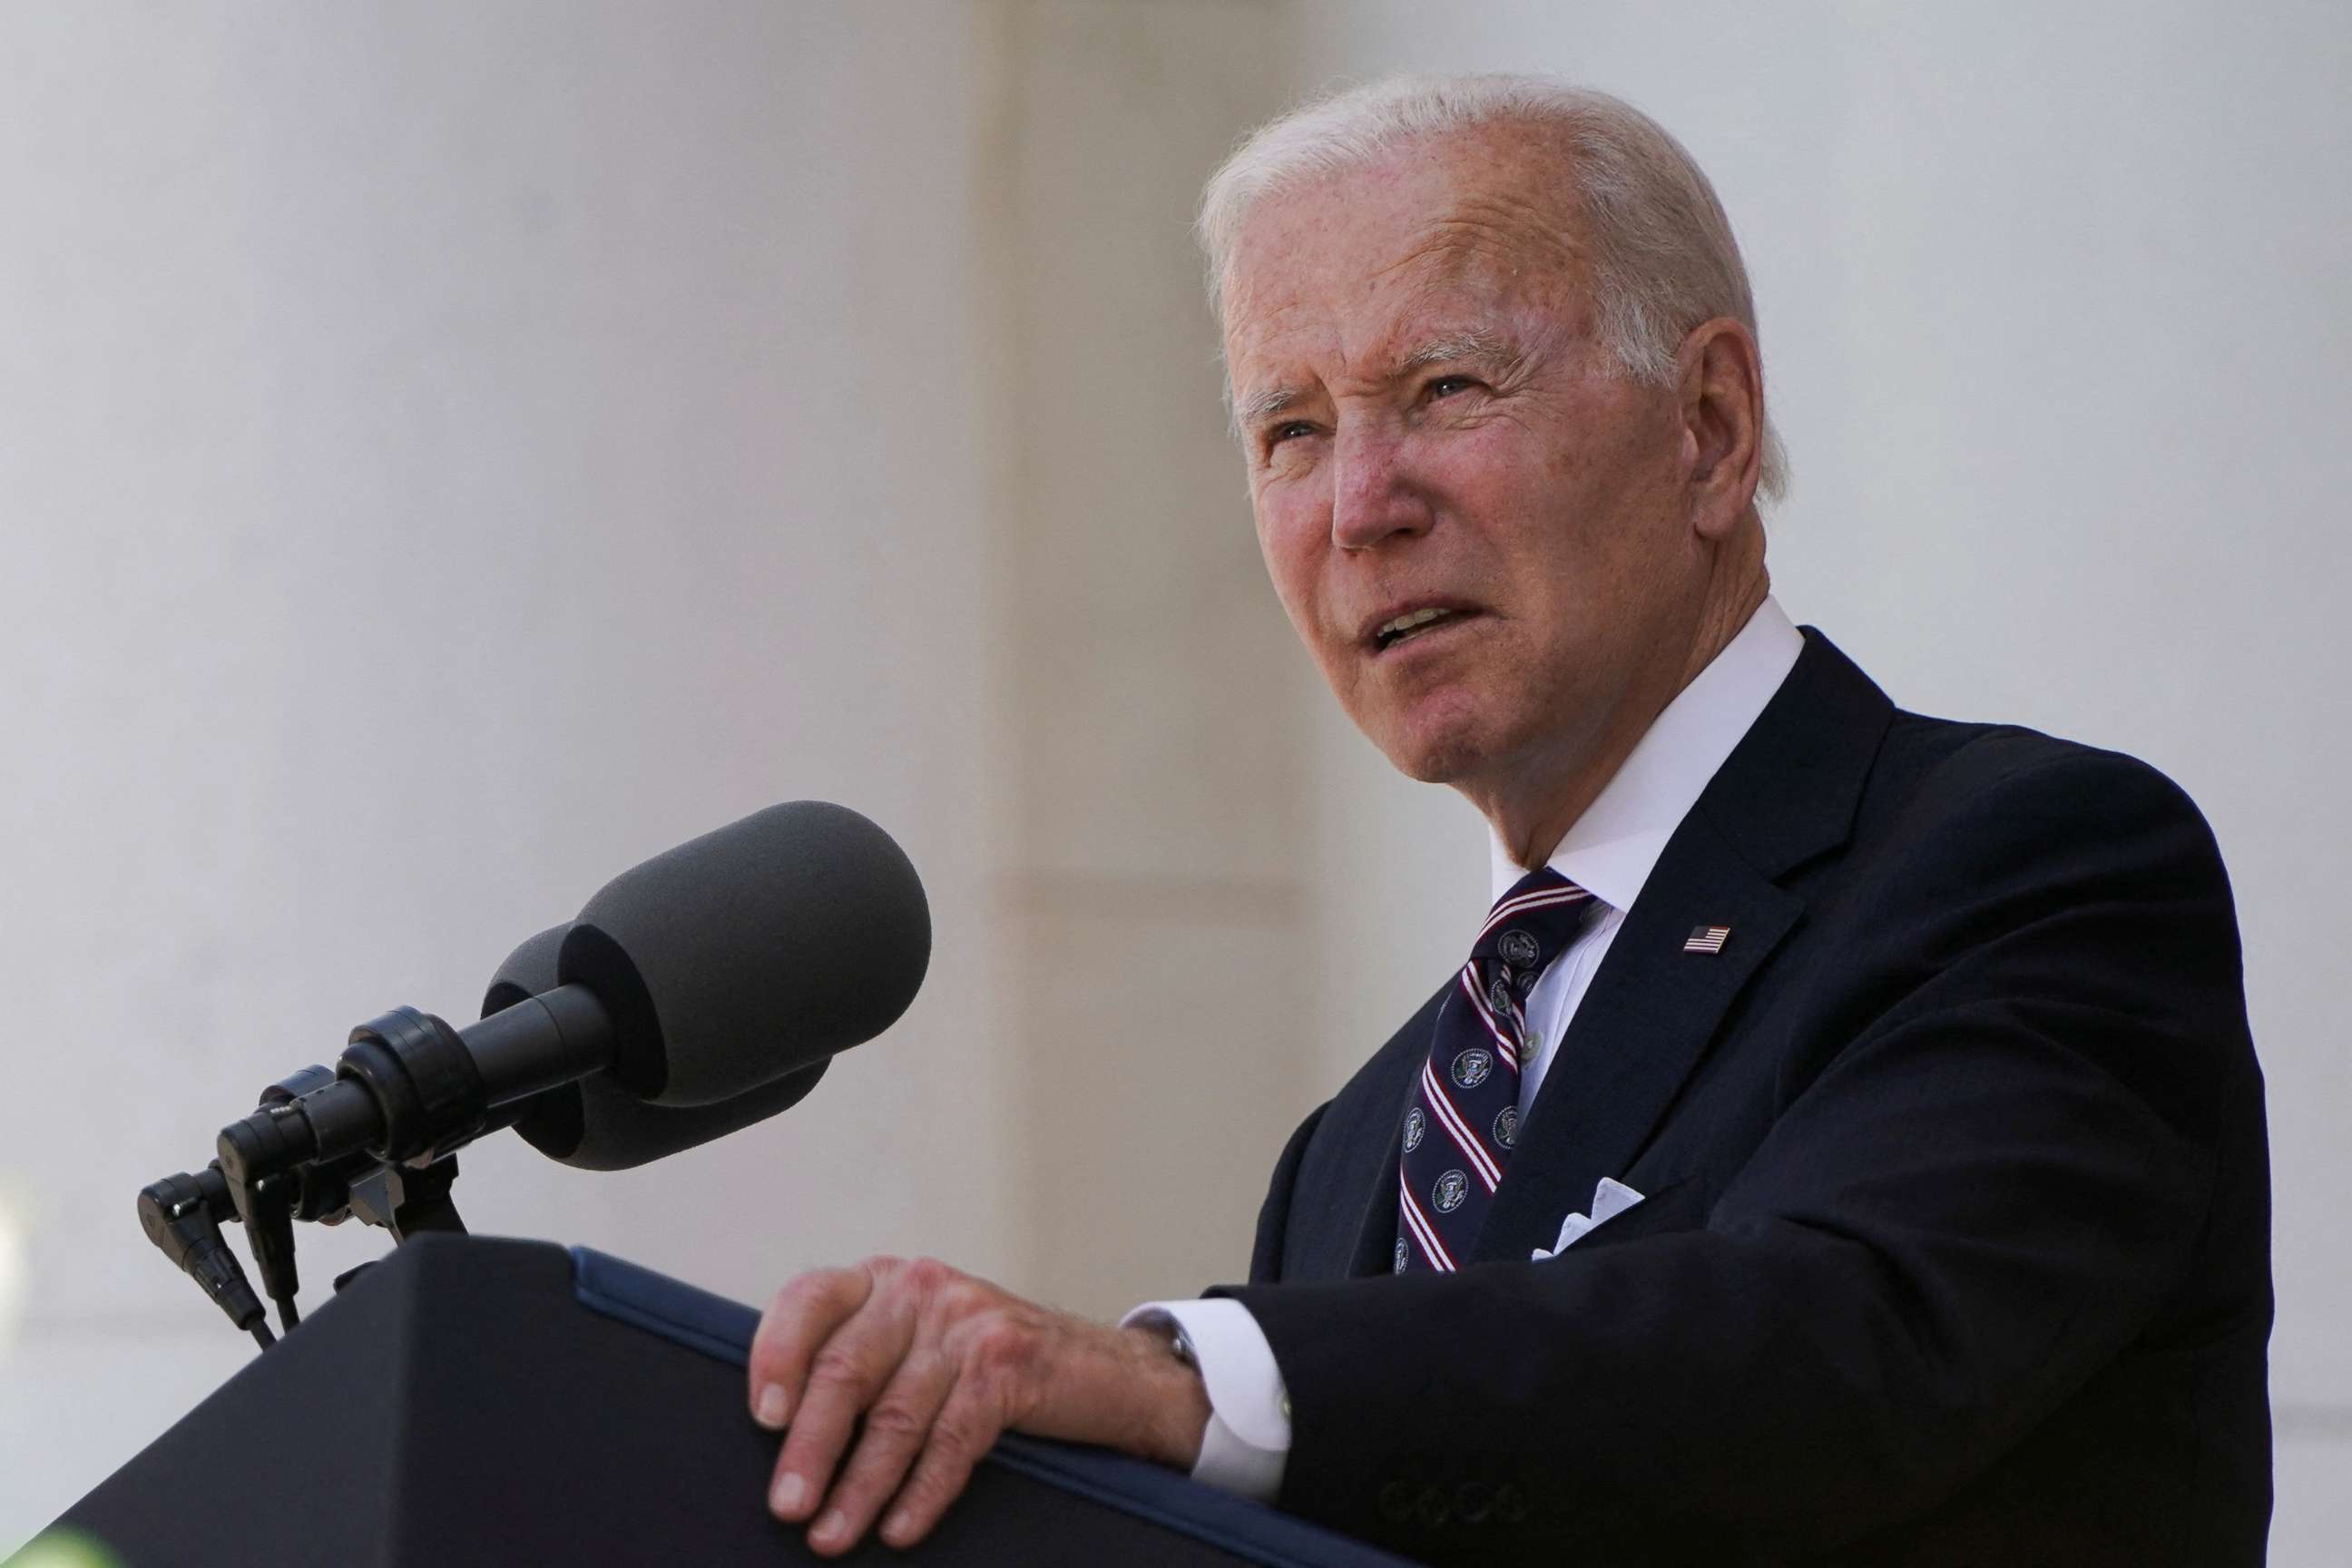 PHOTO: President Joe Biden speaks during the 154th National Memorial Day Wreath-Laying and Observance ceremony to honor America's fallen, at Arlington National Cemetery in Arlington, Virginia, May 30, 2022.